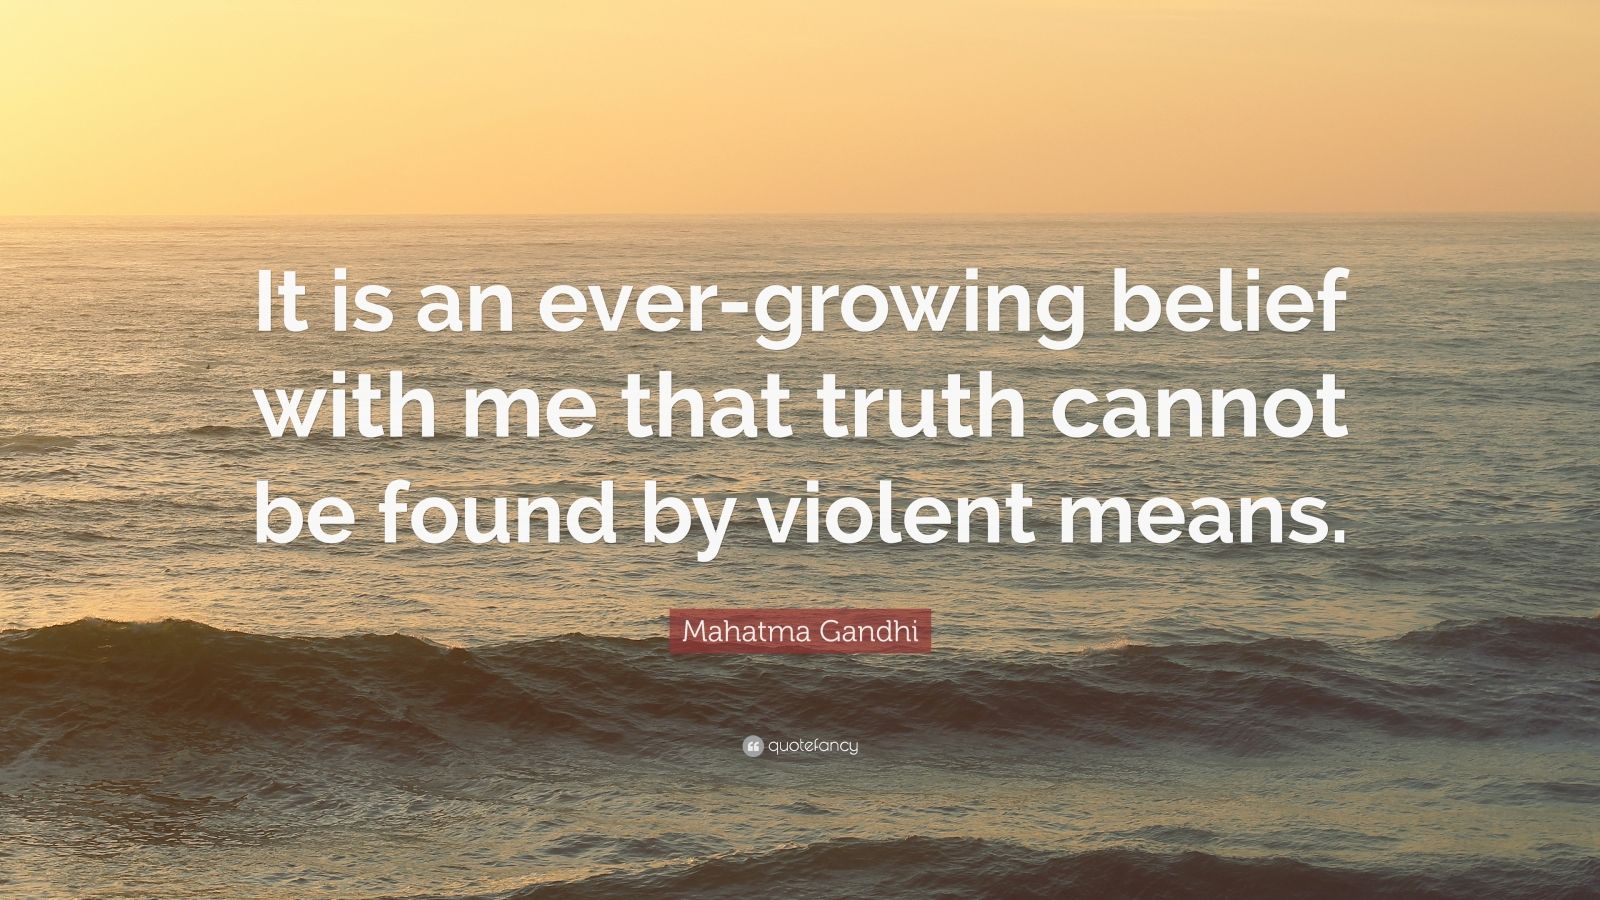 Mahatma Gandhi Quote: “It is an ever-growing belief with me that truth ...